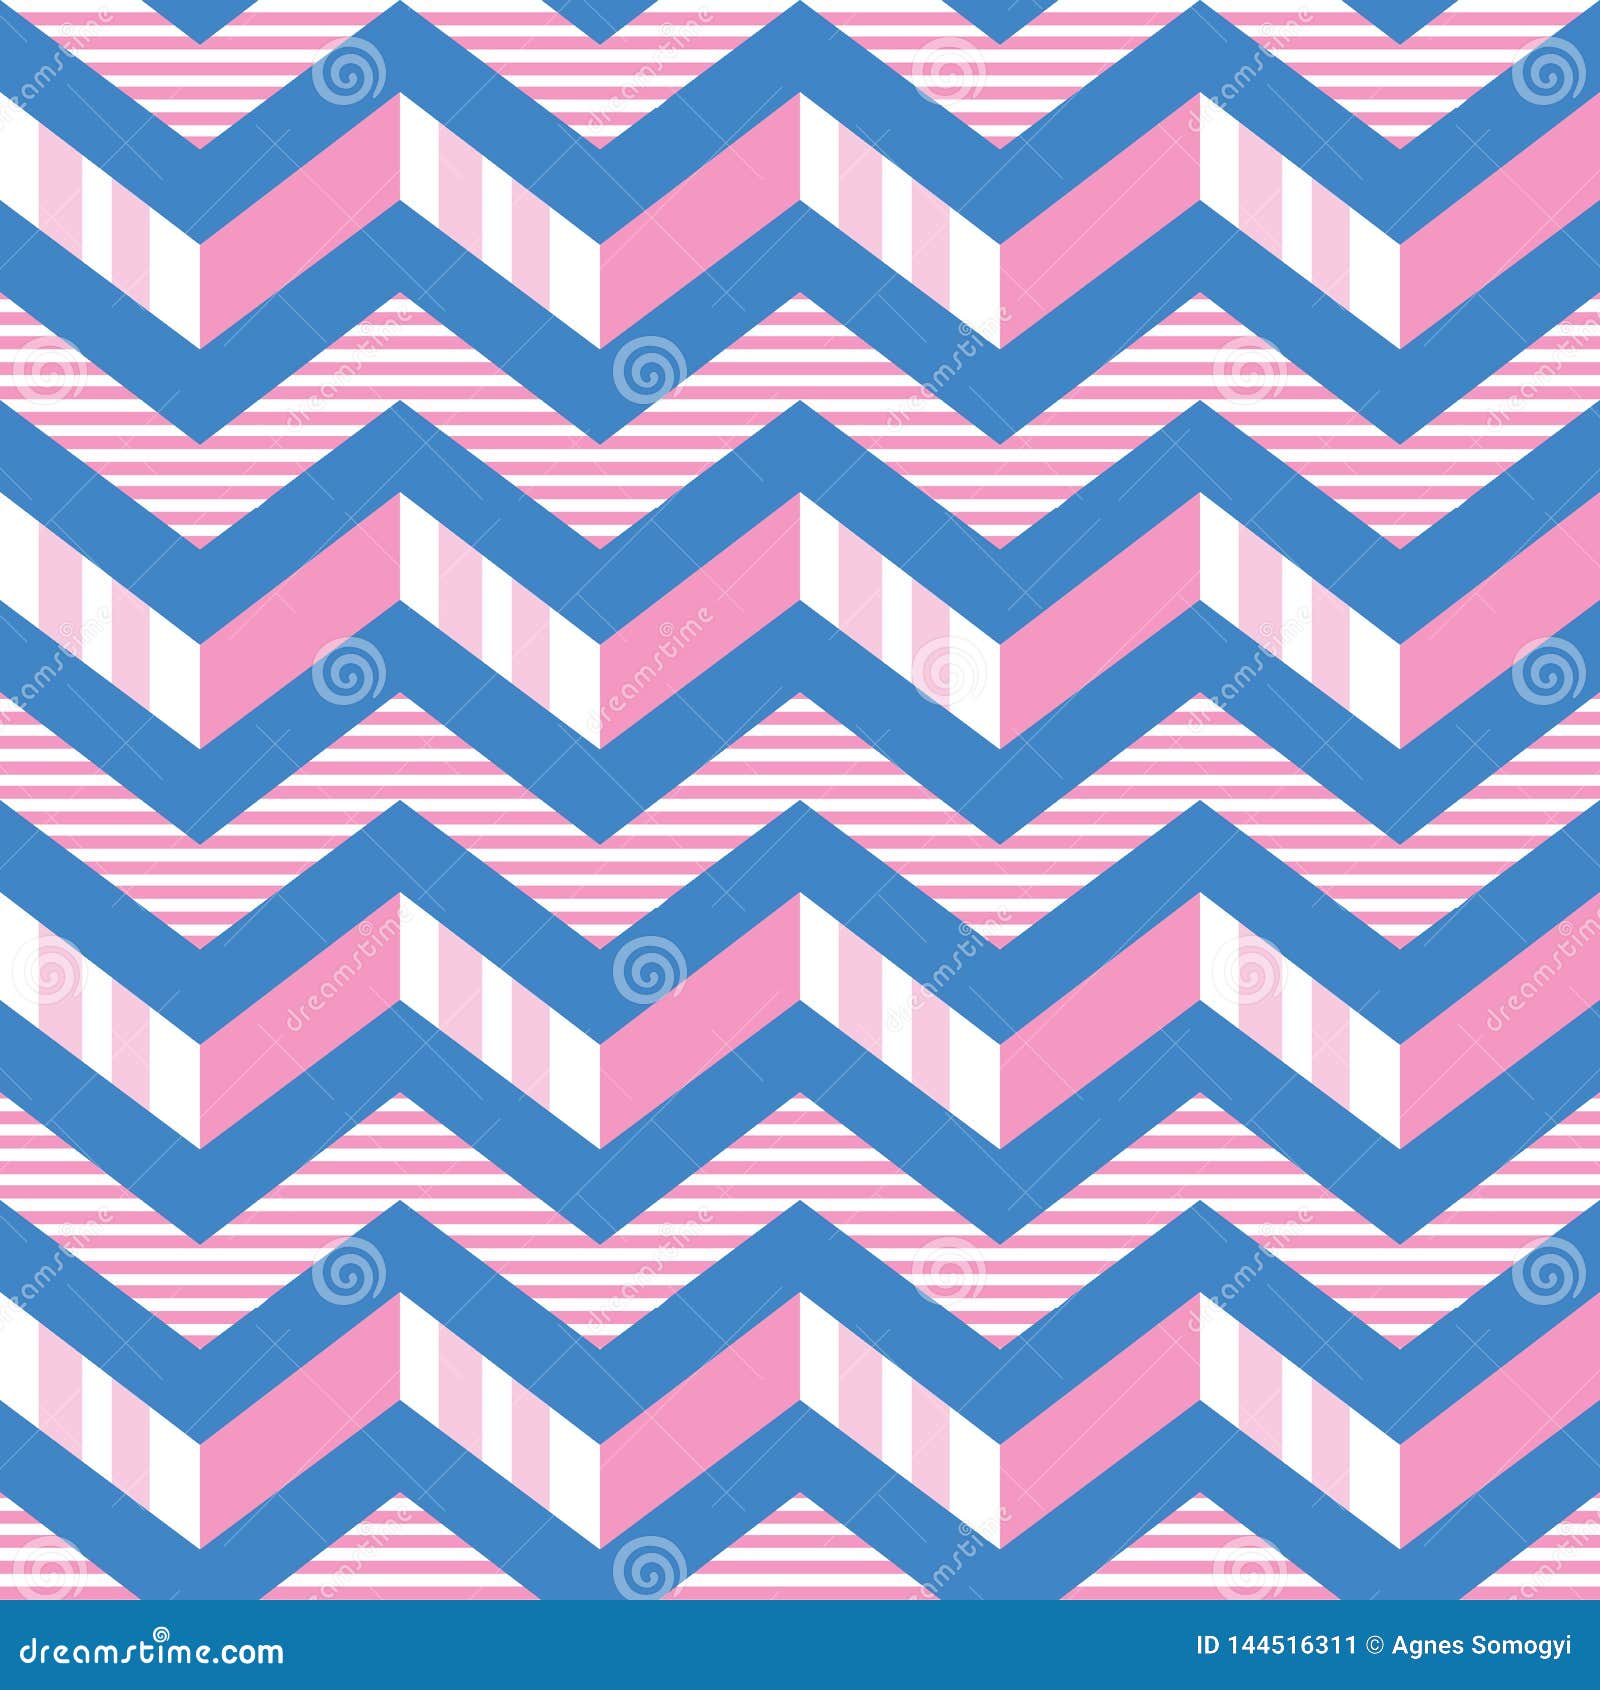 Two Inch Pink Stripe Fabric, Wallpaper and Home Decor